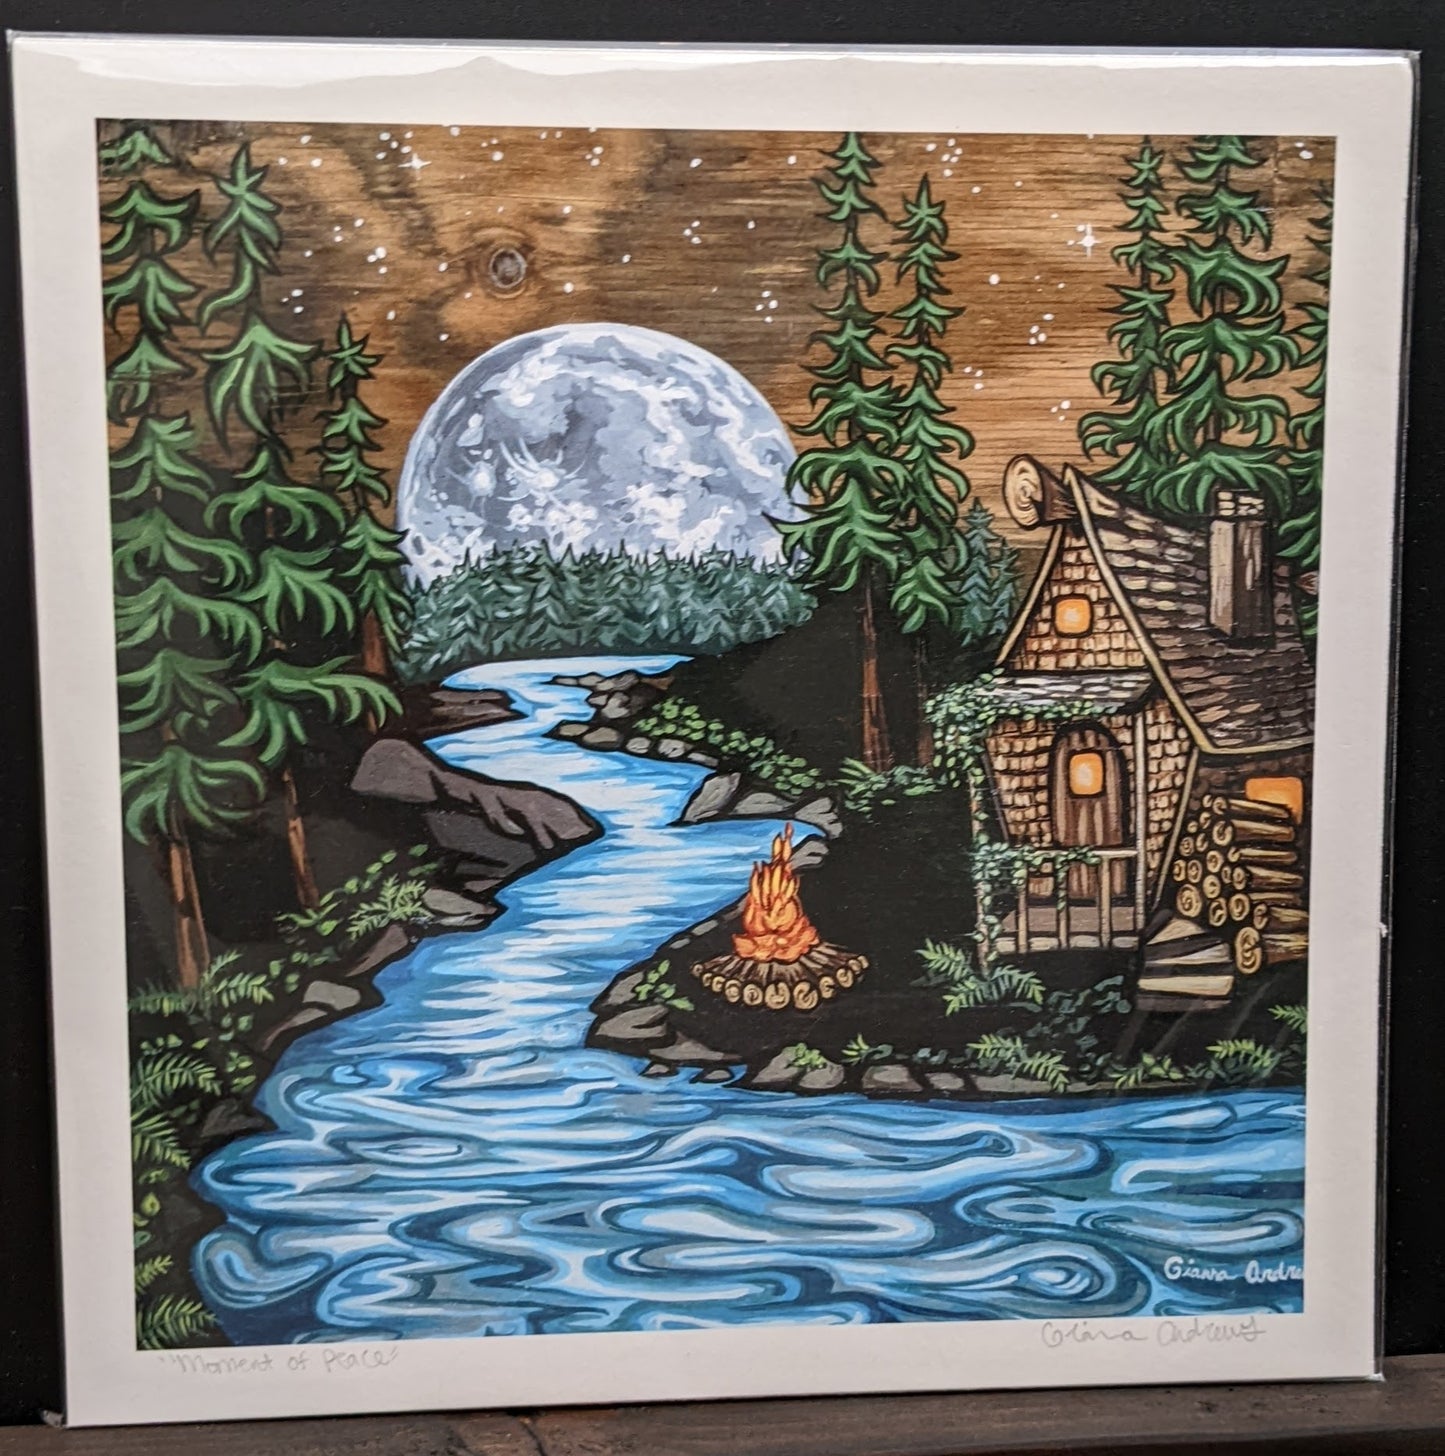 Moment of Peace Cabin by the River with full moon art print by Gianna Andrews